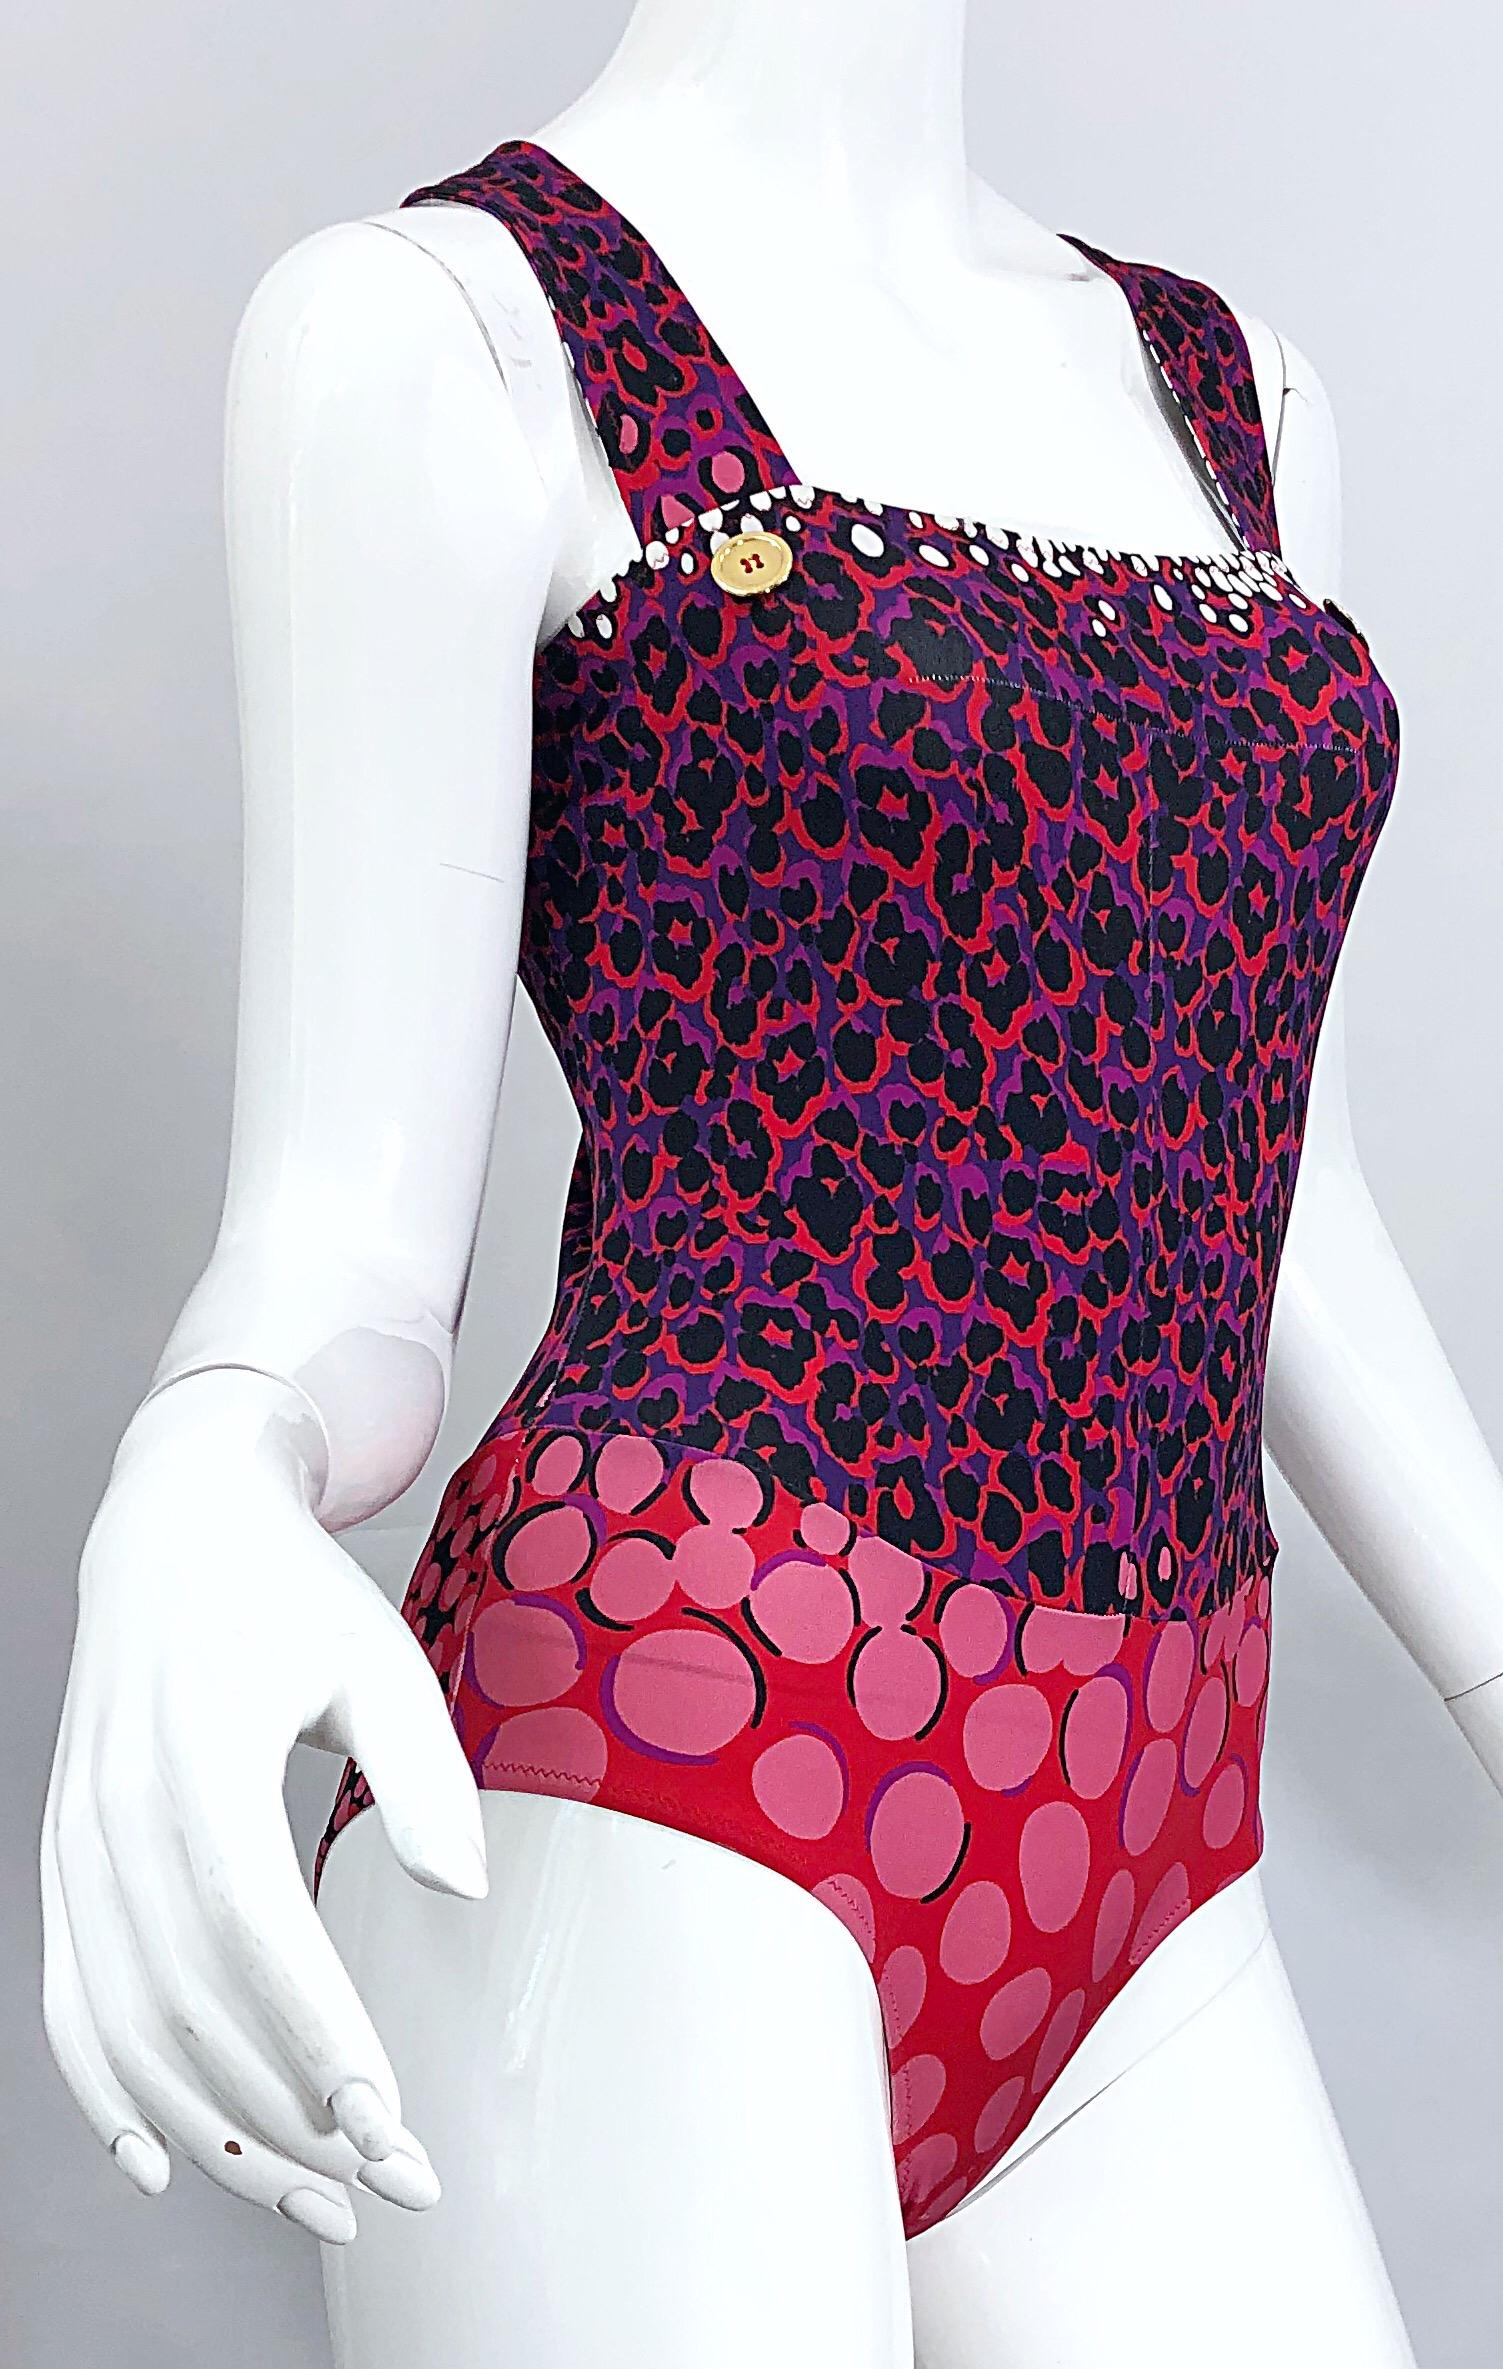 New Yves Saint Laurent Leopard Polka Dot Purple Red One Piece Swimsuit Bodysuit In New Condition For Sale In San Diego, CA